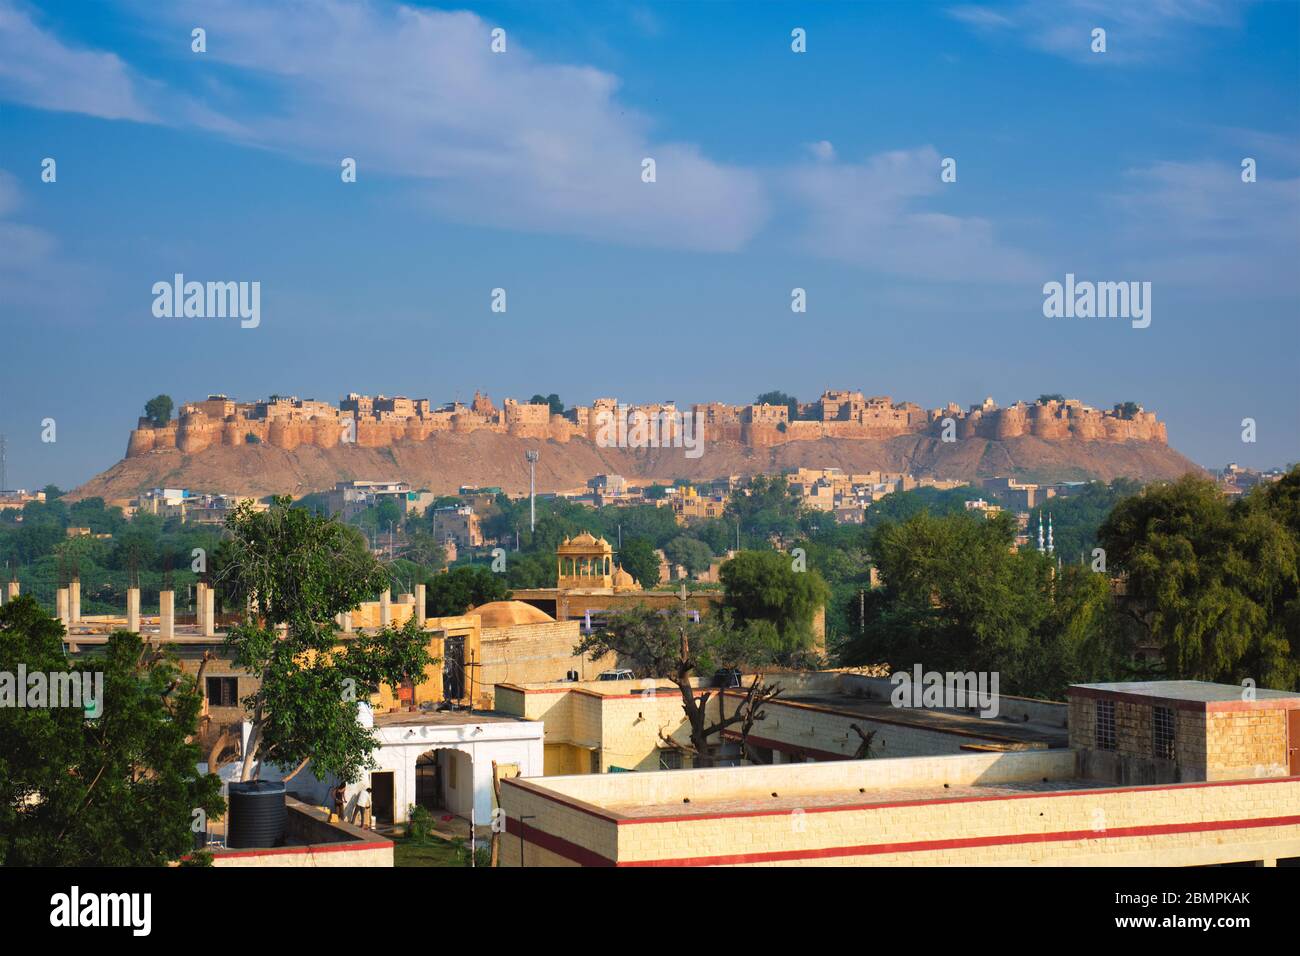 Jaisalmer Fort known as the Golden Fort Sonar quila, Jaisalmer, India Stock Photo